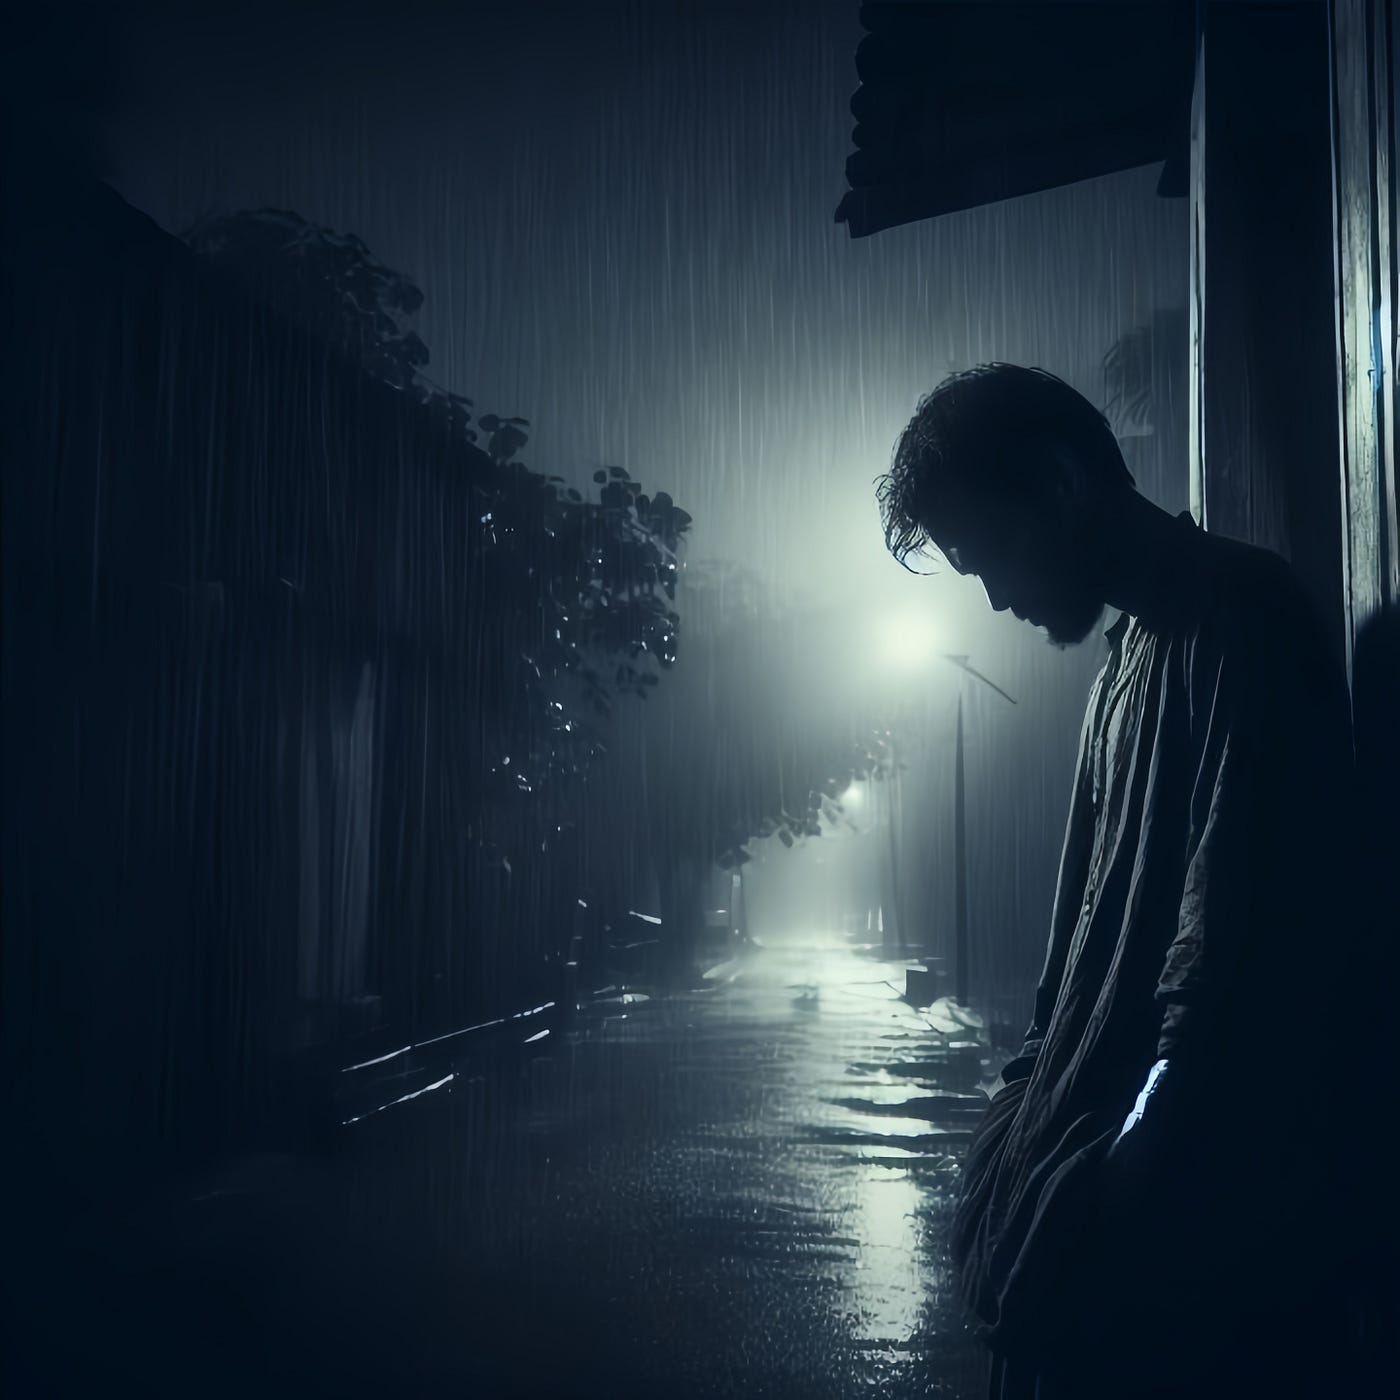 A man standing in the rain at night, a picture, by Matt Stewart, shutterstock, digital art, depressed sad expression, in an alley at night back lit, is totally sad and cries, stock